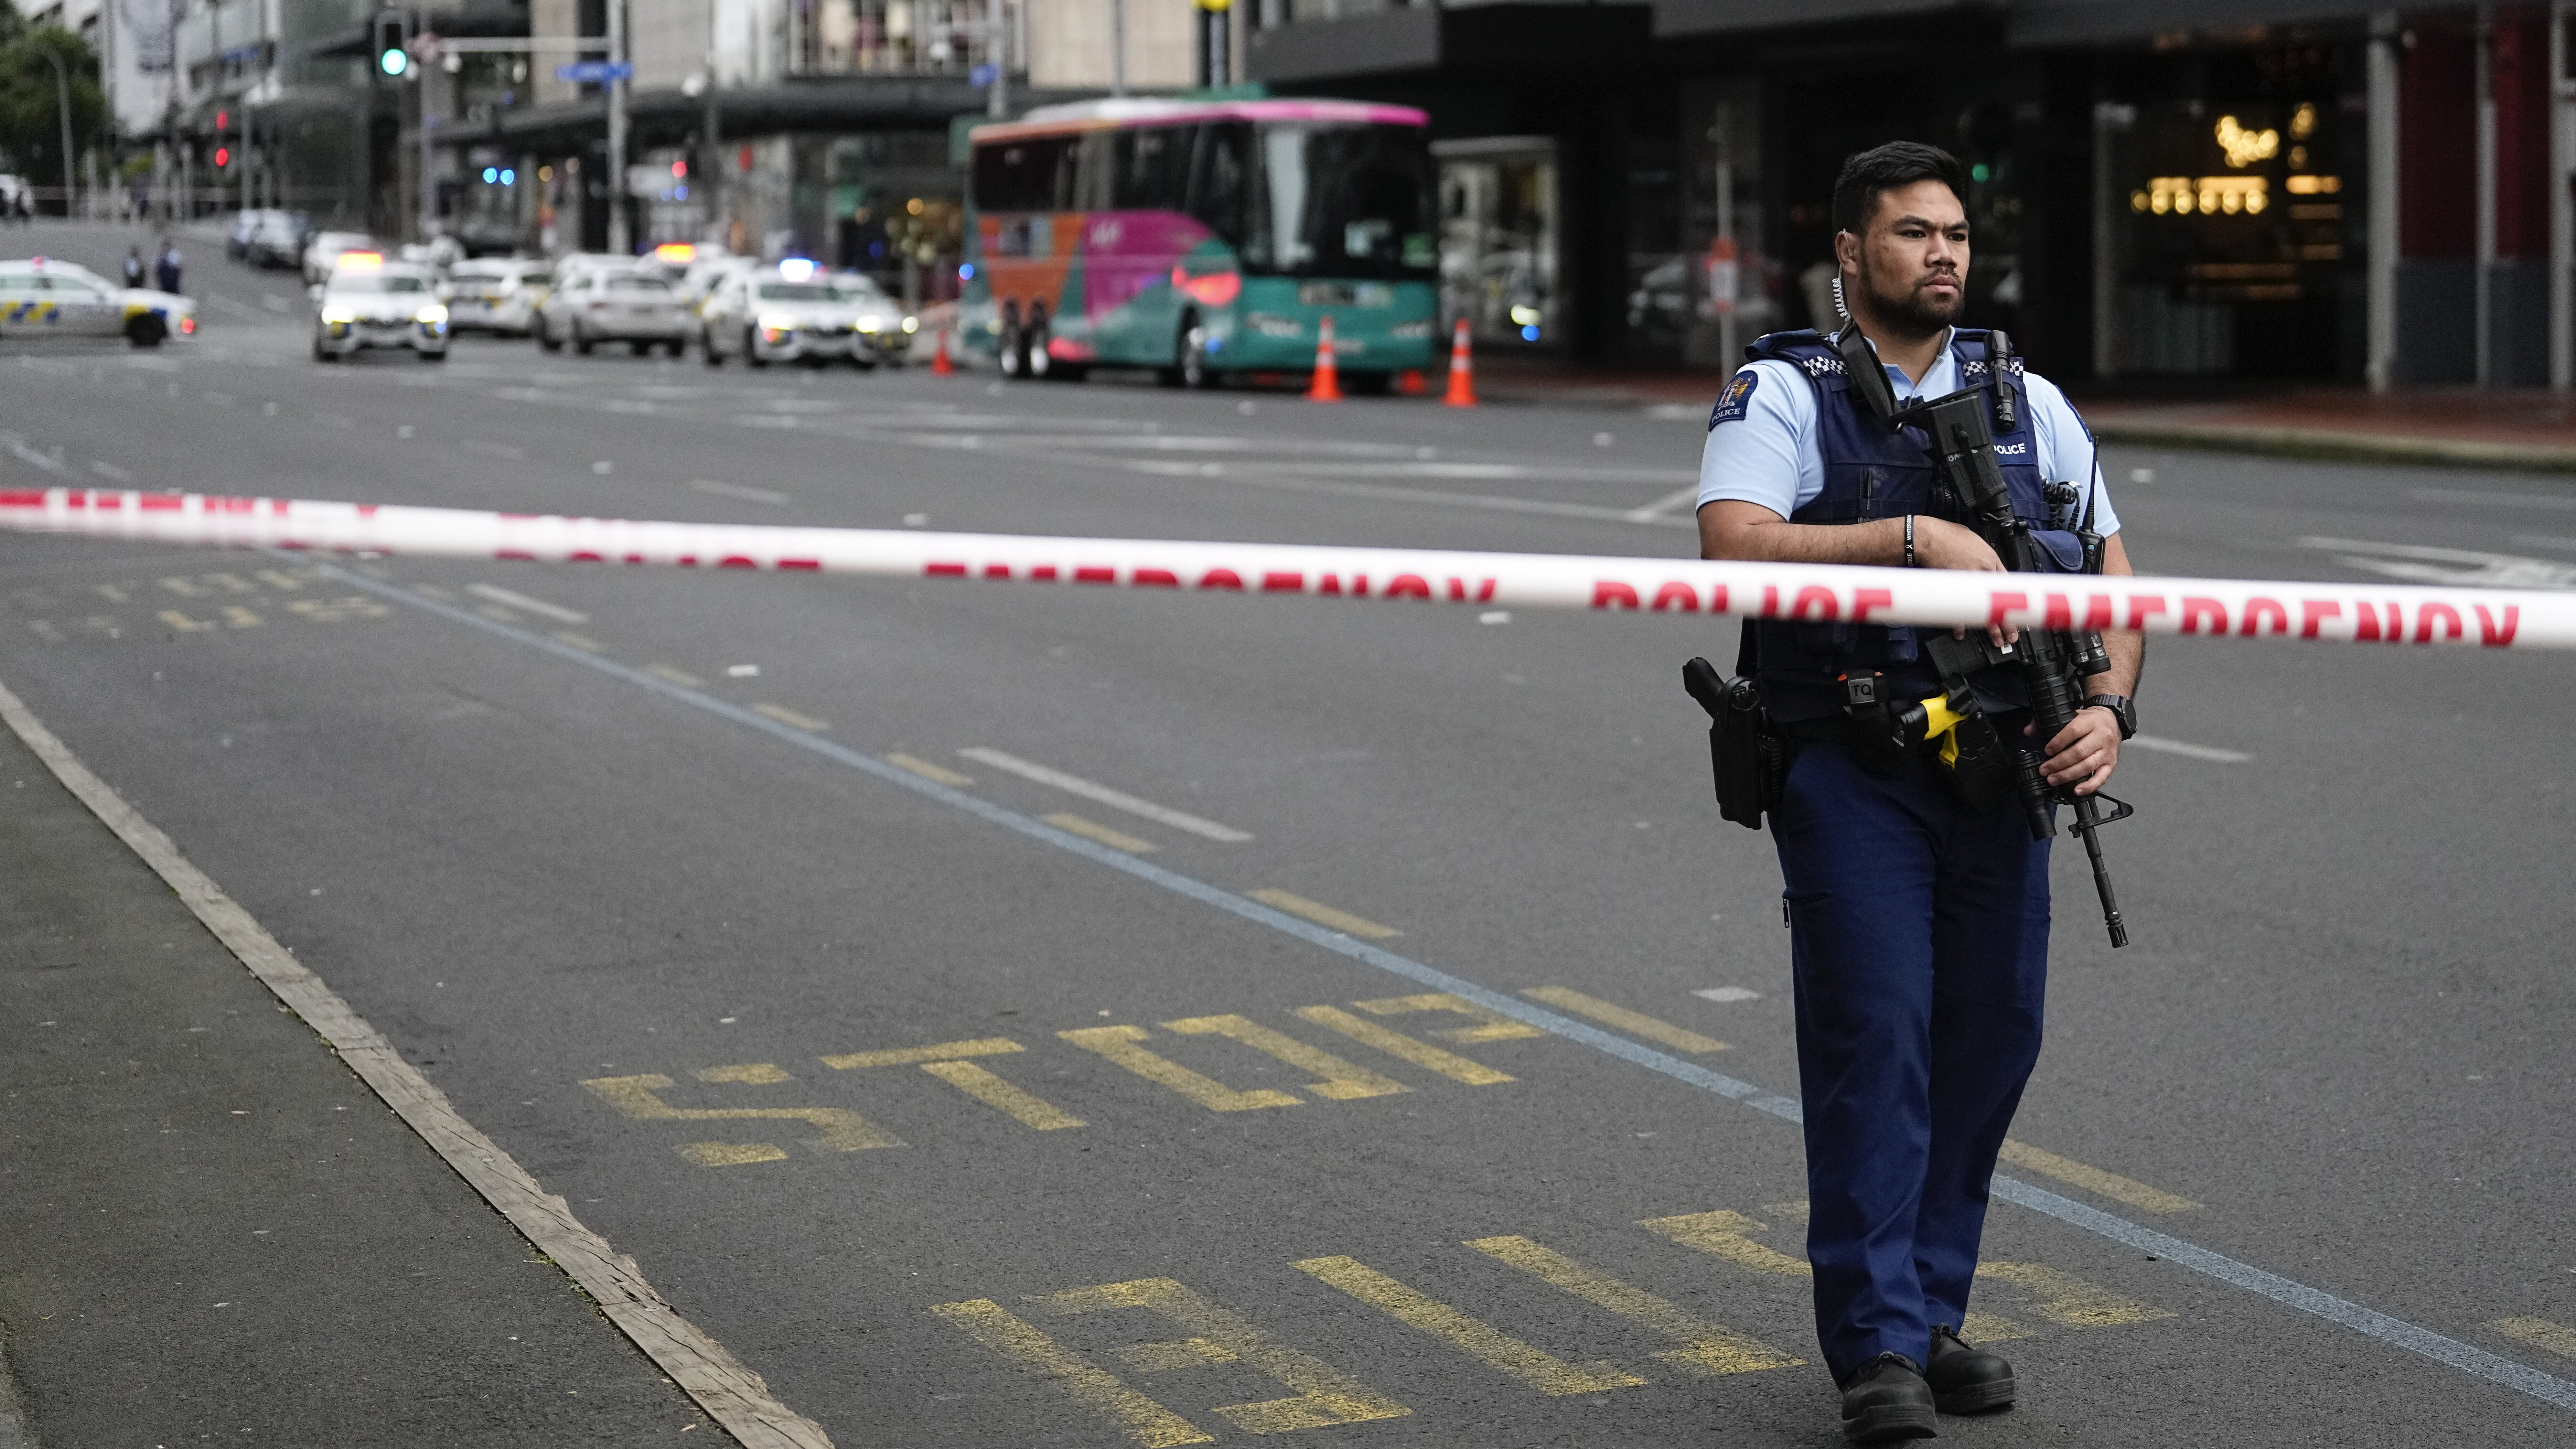 new Zealand police officer pictured following a fatal shooting...